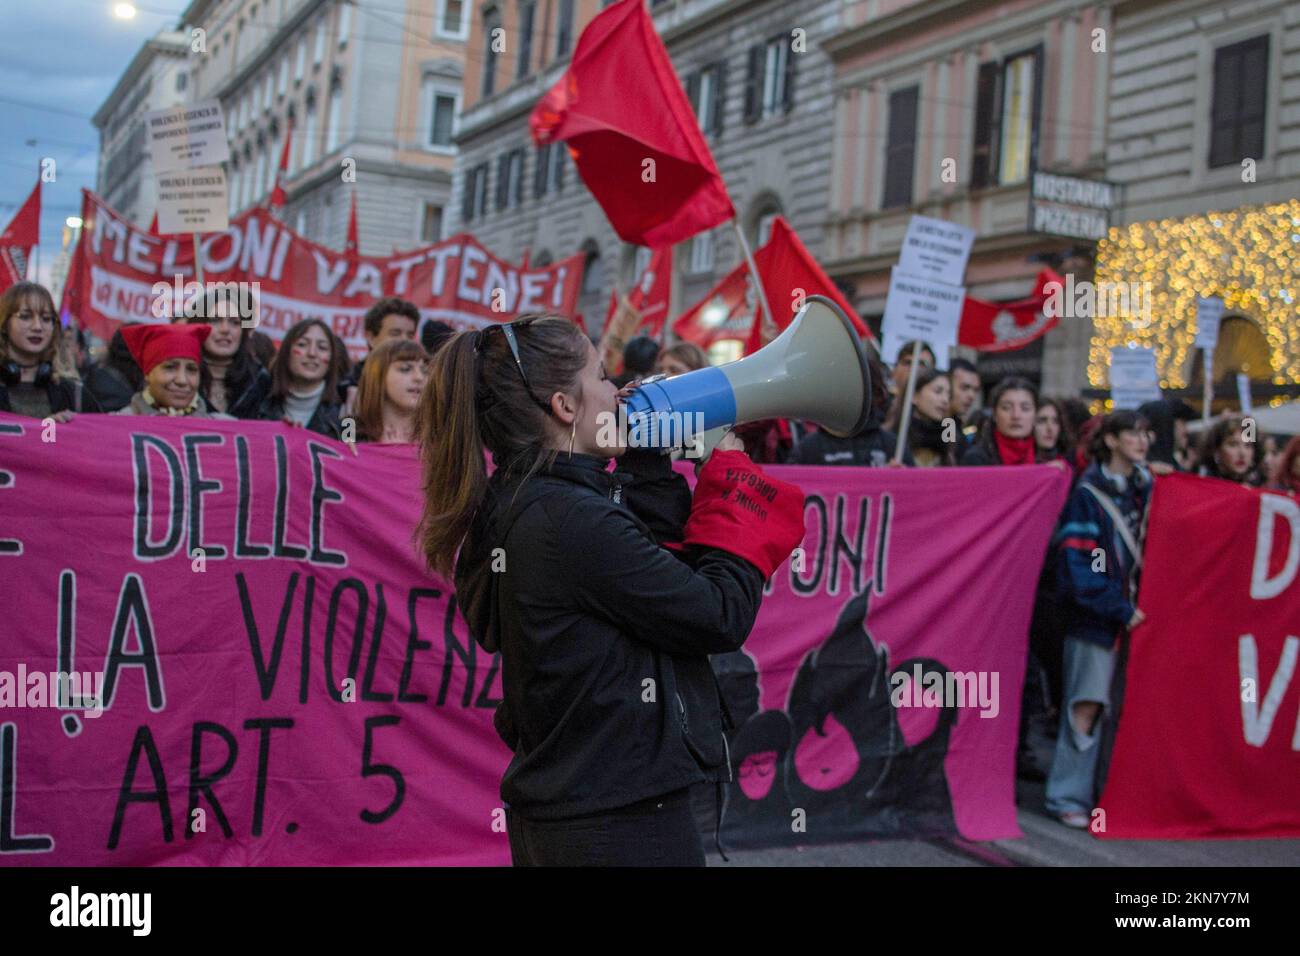 Rome, Italy. 26th Nov, 2022. Procession in Rome against violence against women organized by Non una di meno on the occasion of the International Day Against Violence Against Women on November 25. (Photo by Patrizia Cortellessa/Pacific Press) Credit: Pacific Press Media Production Corp./Alamy Live News Stock Photo